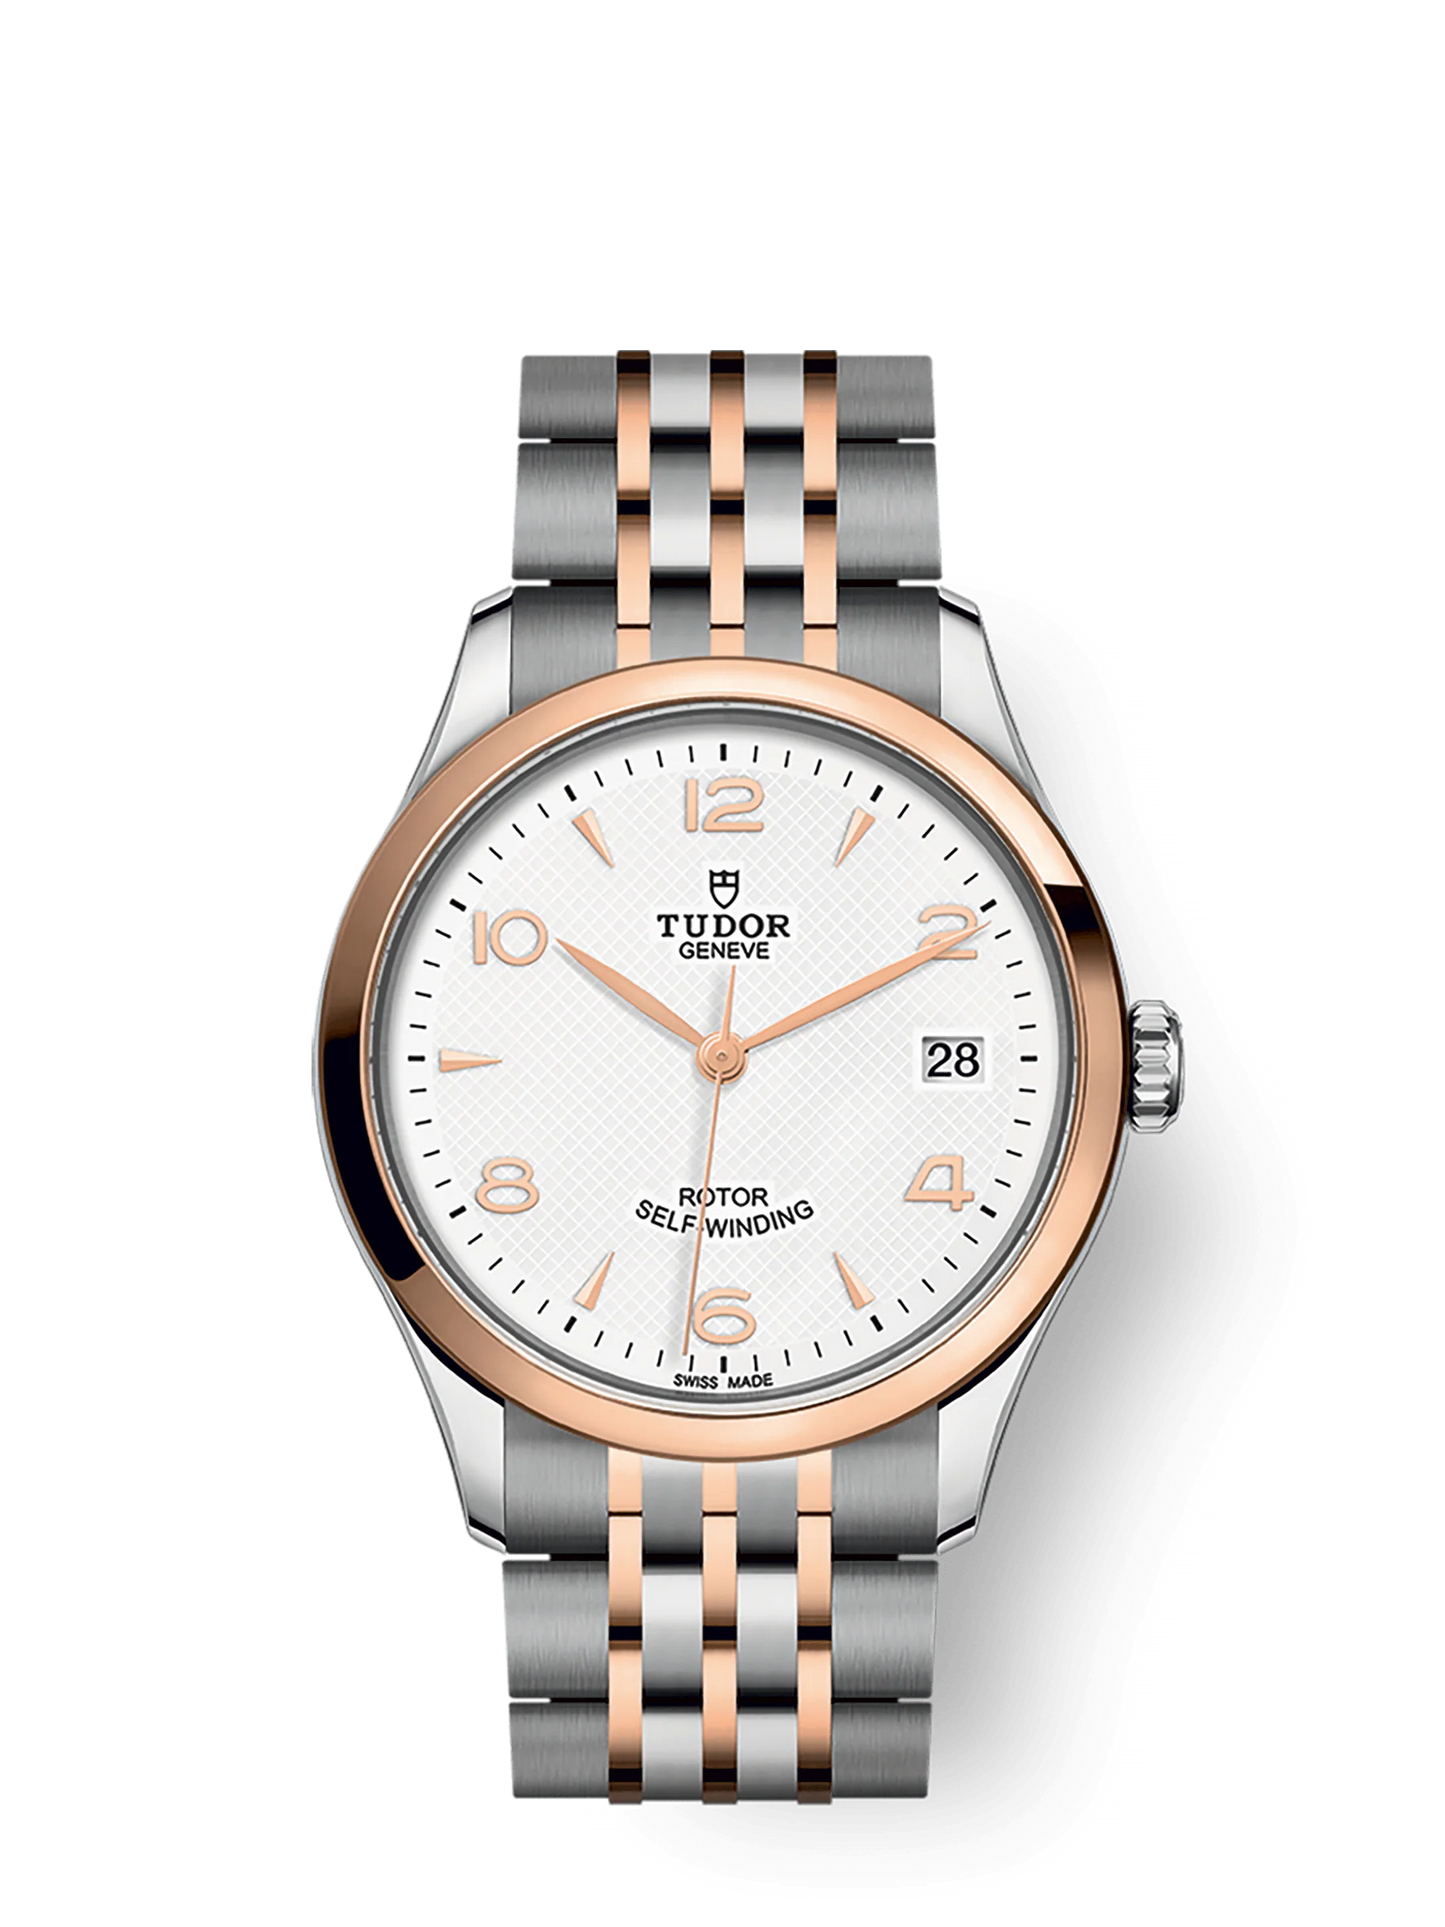 Tudor 1926, Stainless Steel and 18k Rose Gold, 36mm, Ref# M91451-0009